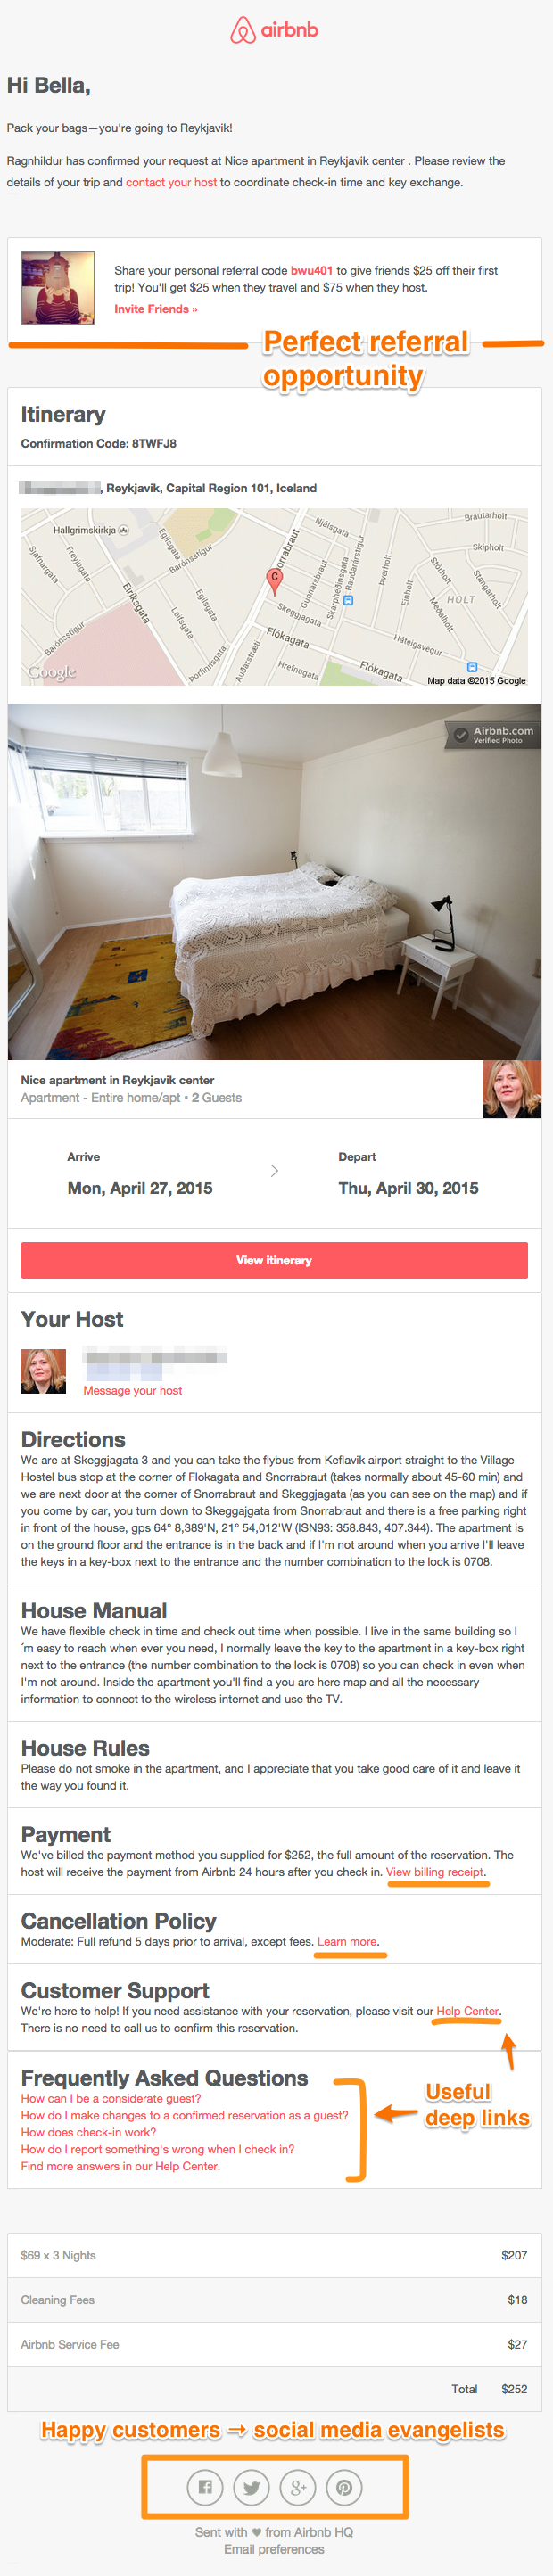 Airbnb's reservation confirmation email